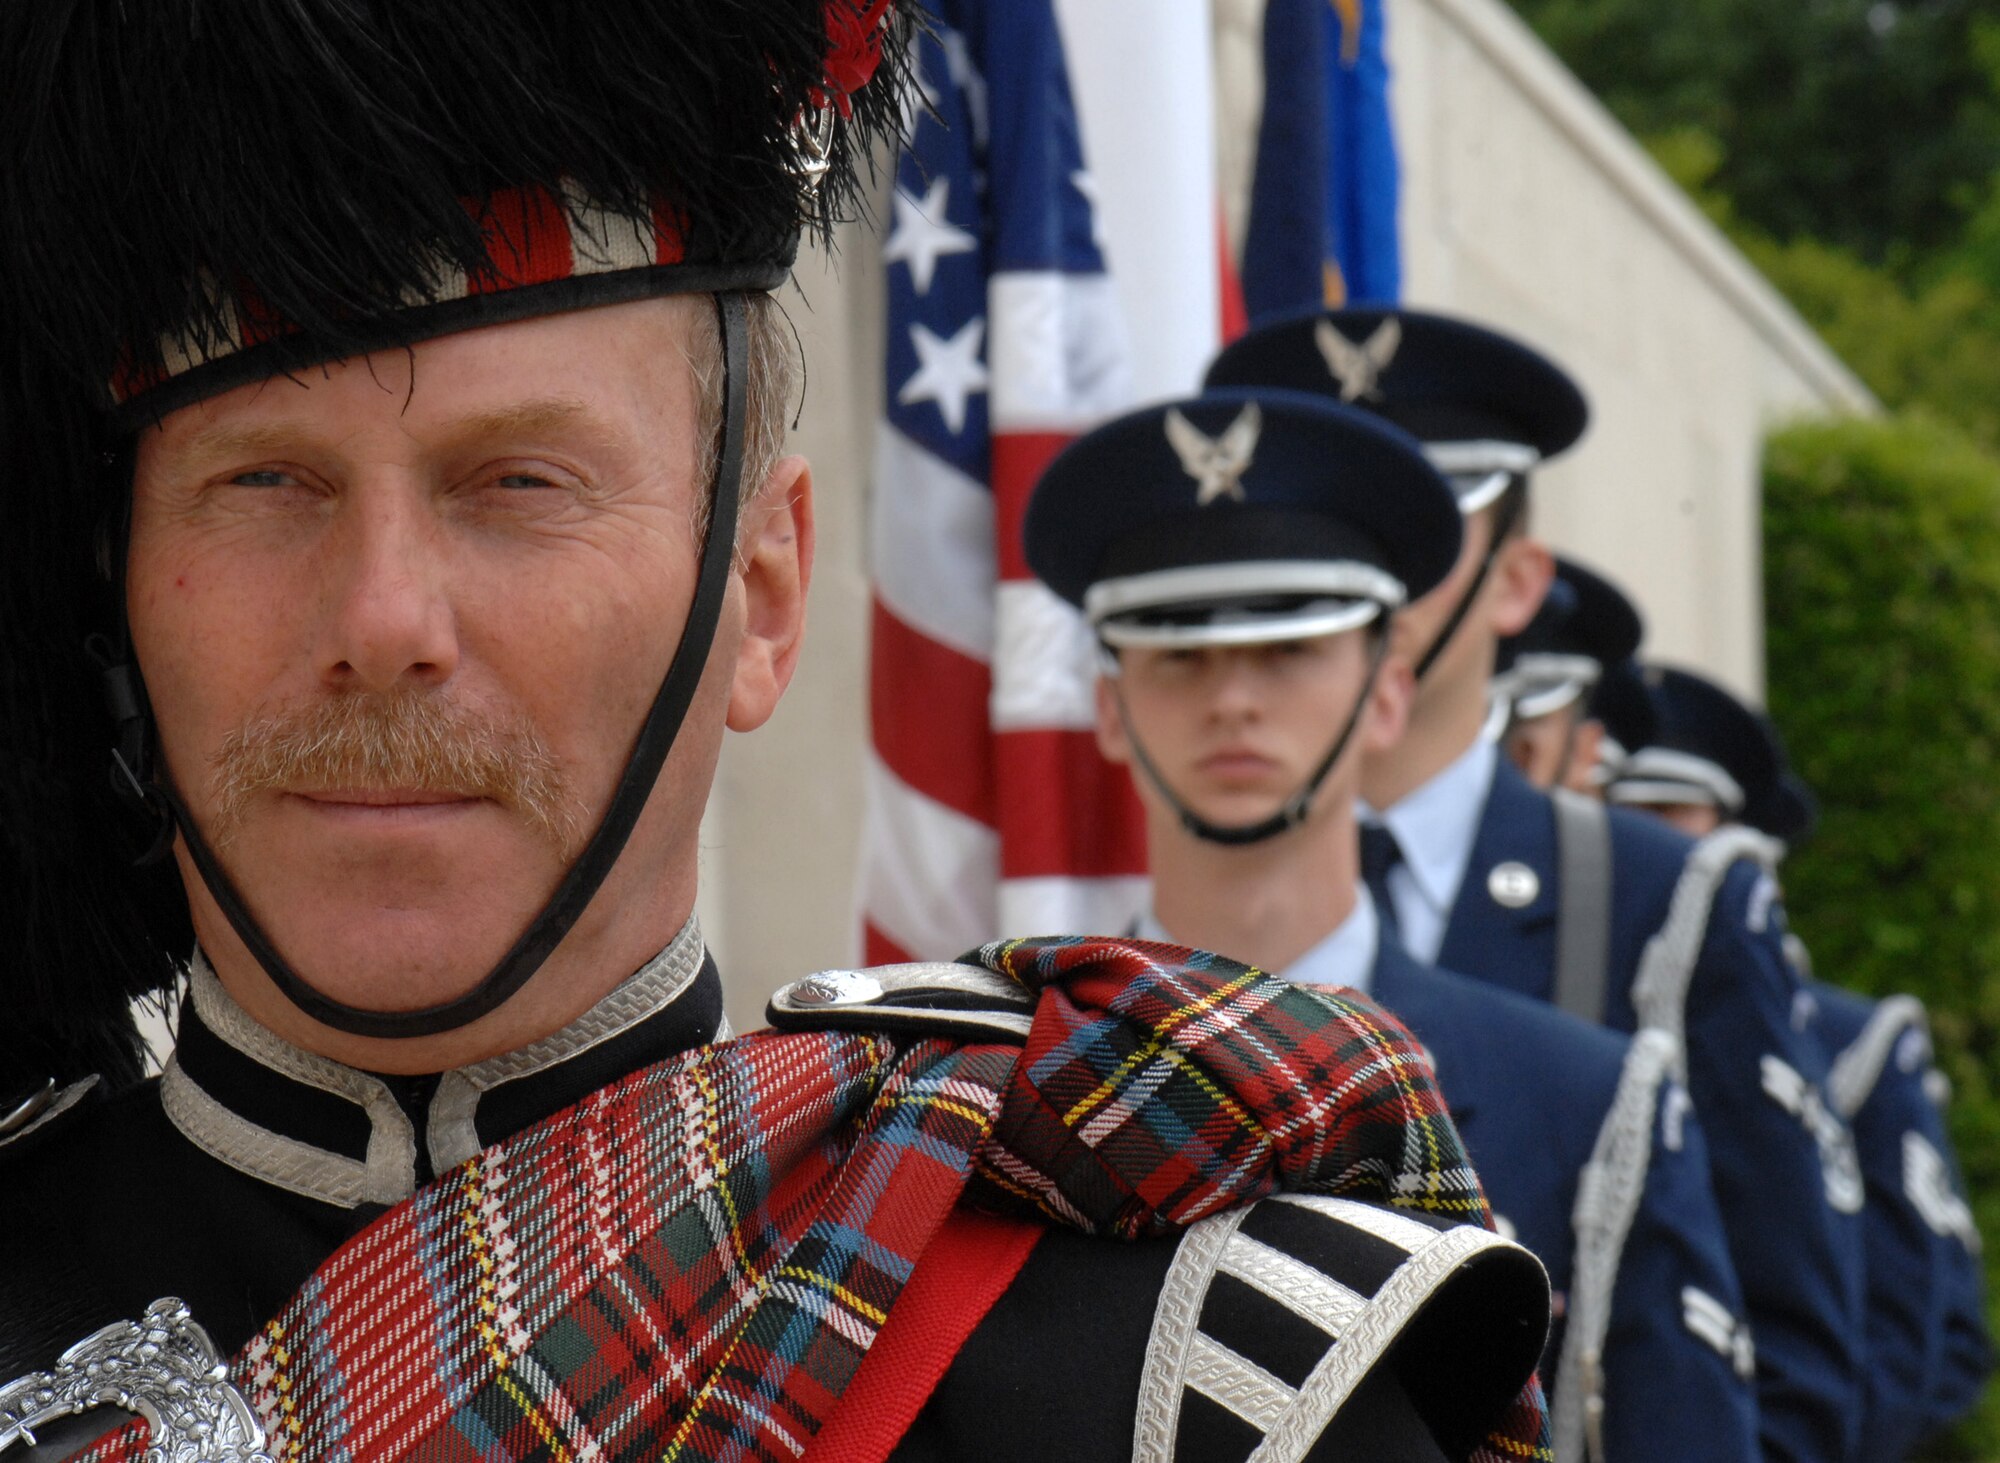 Dave Harper, the piper for the Memorial Day ceremony at Madingley Memorial Cemetery, prepares to march with the RAF Mildenhall Honor Guard Colors Team, May 25, 2009.  The colors team participated in a full-honors tribute to the veterans laid to rest on British soil.  (U.S. Air Force photo by Senior Airman Christopher L. Ingersoll)